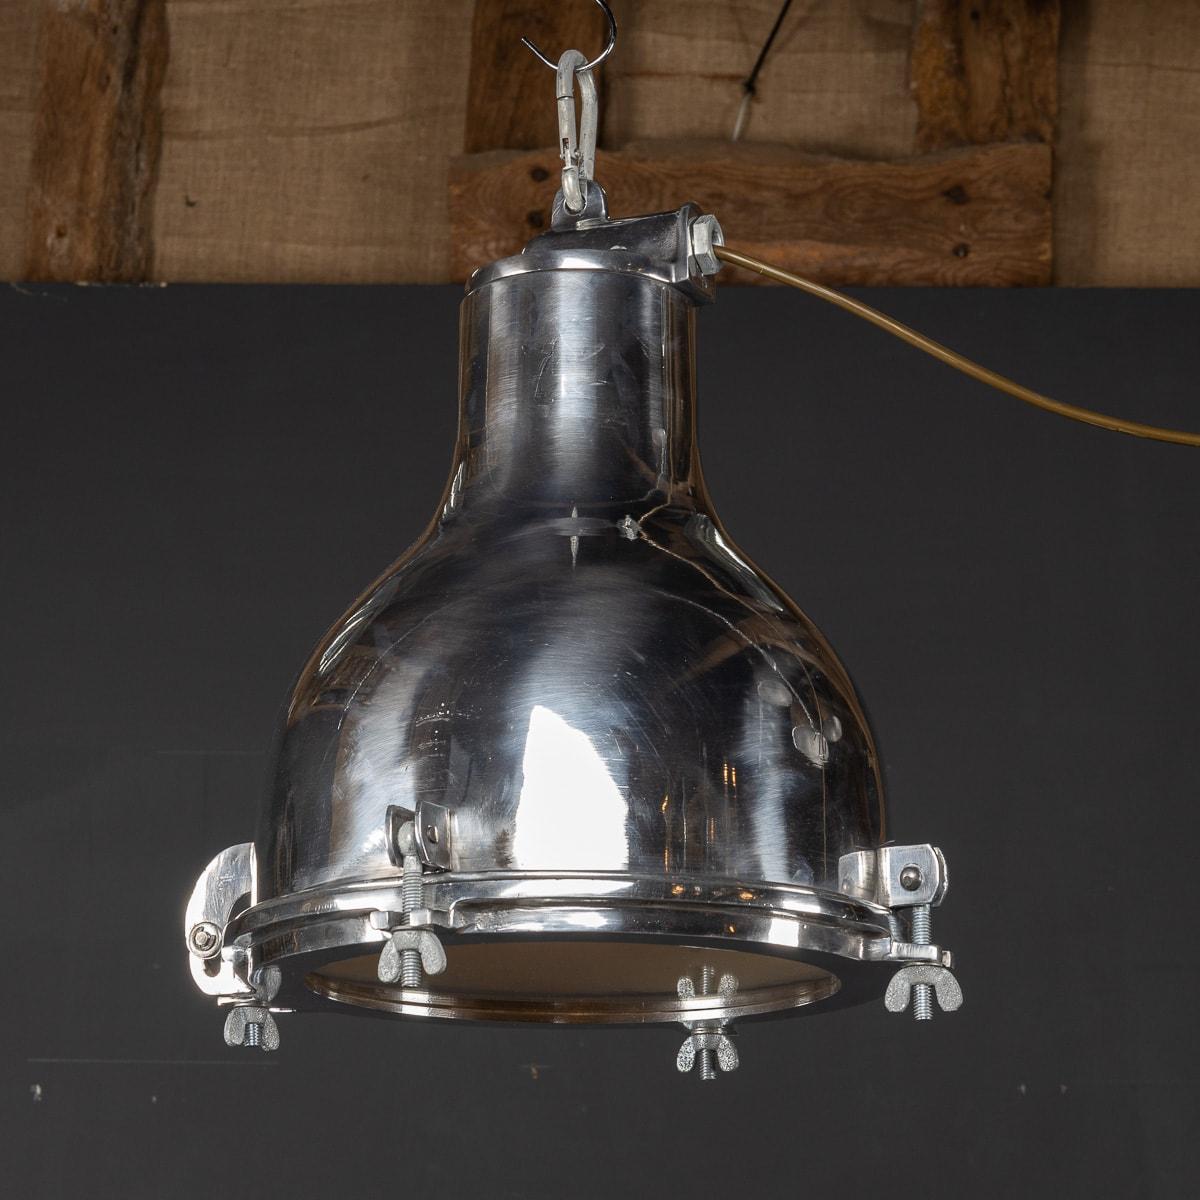 A fabulous polished aluminium light that once belonged to a Danish ship that circumnavigated the globe delivering cargo goods. Now, beautifully salvaged and restored to its former glory.

CONDITION
In Good Condition. (please refer to